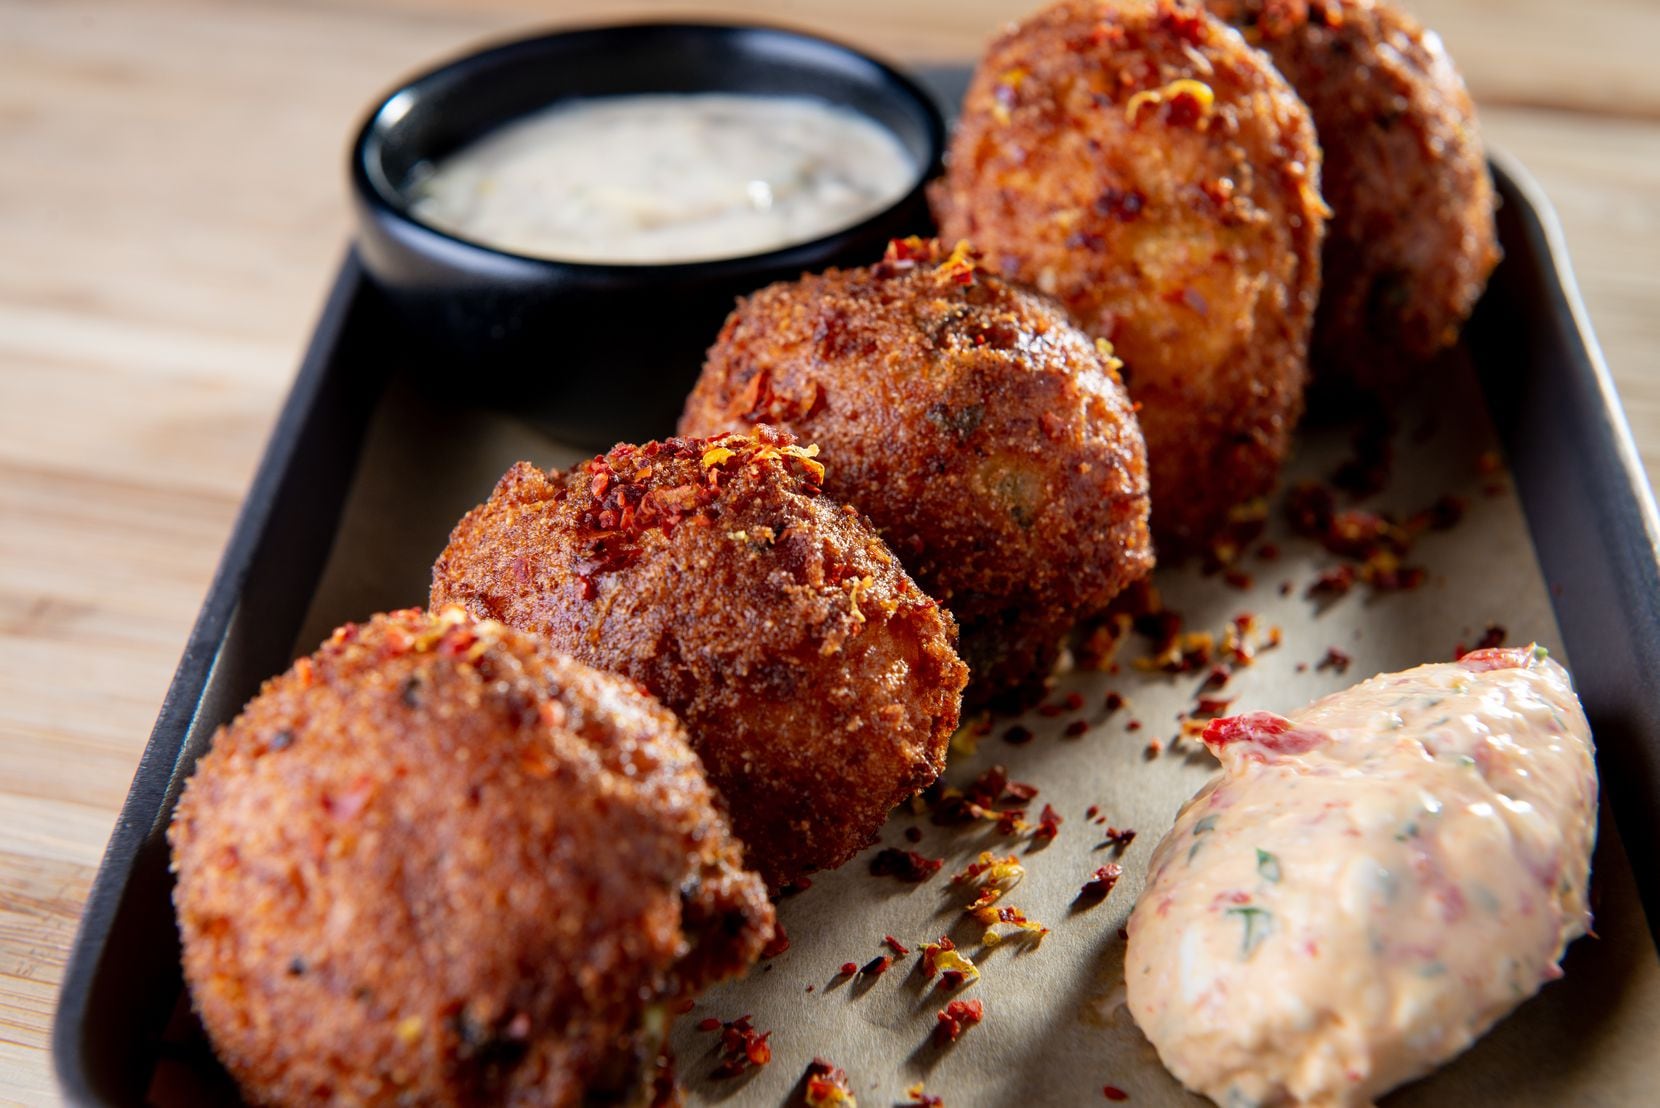 The hushpuppies at Elm and Good restaurant